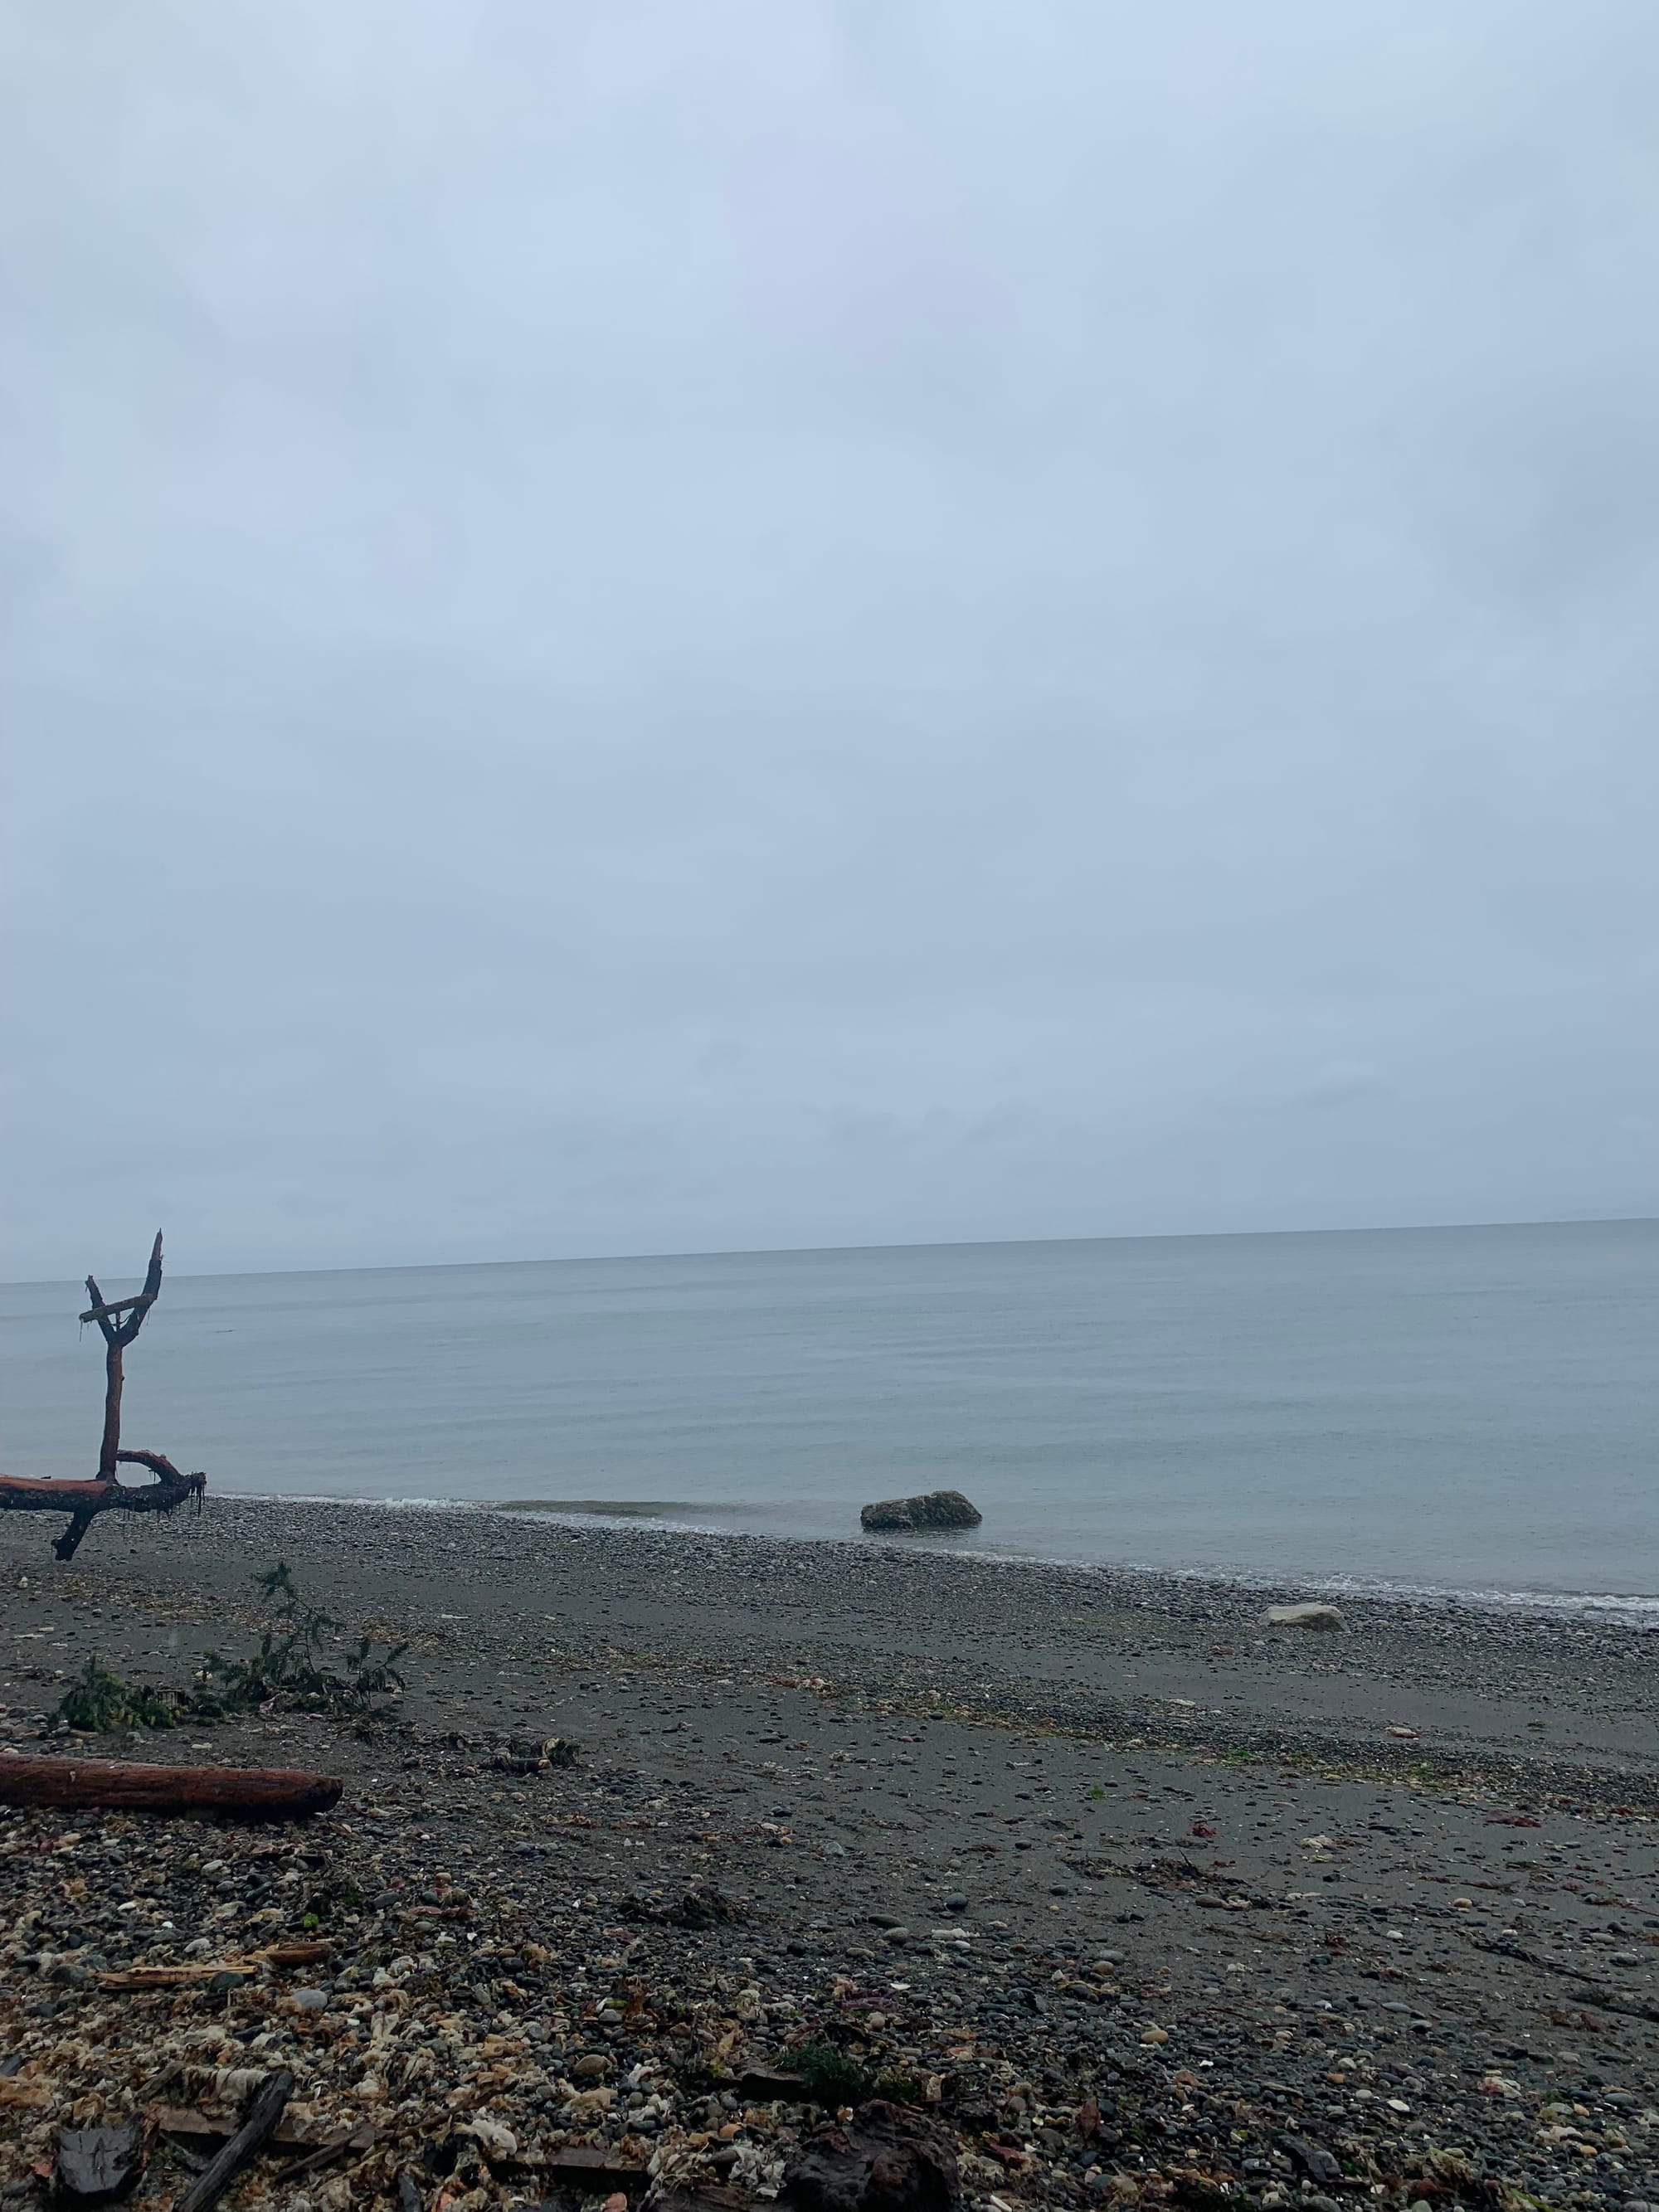 grey sky, sea, & pebble beach, one rock in the low tide, some driftwood propped upright on the left